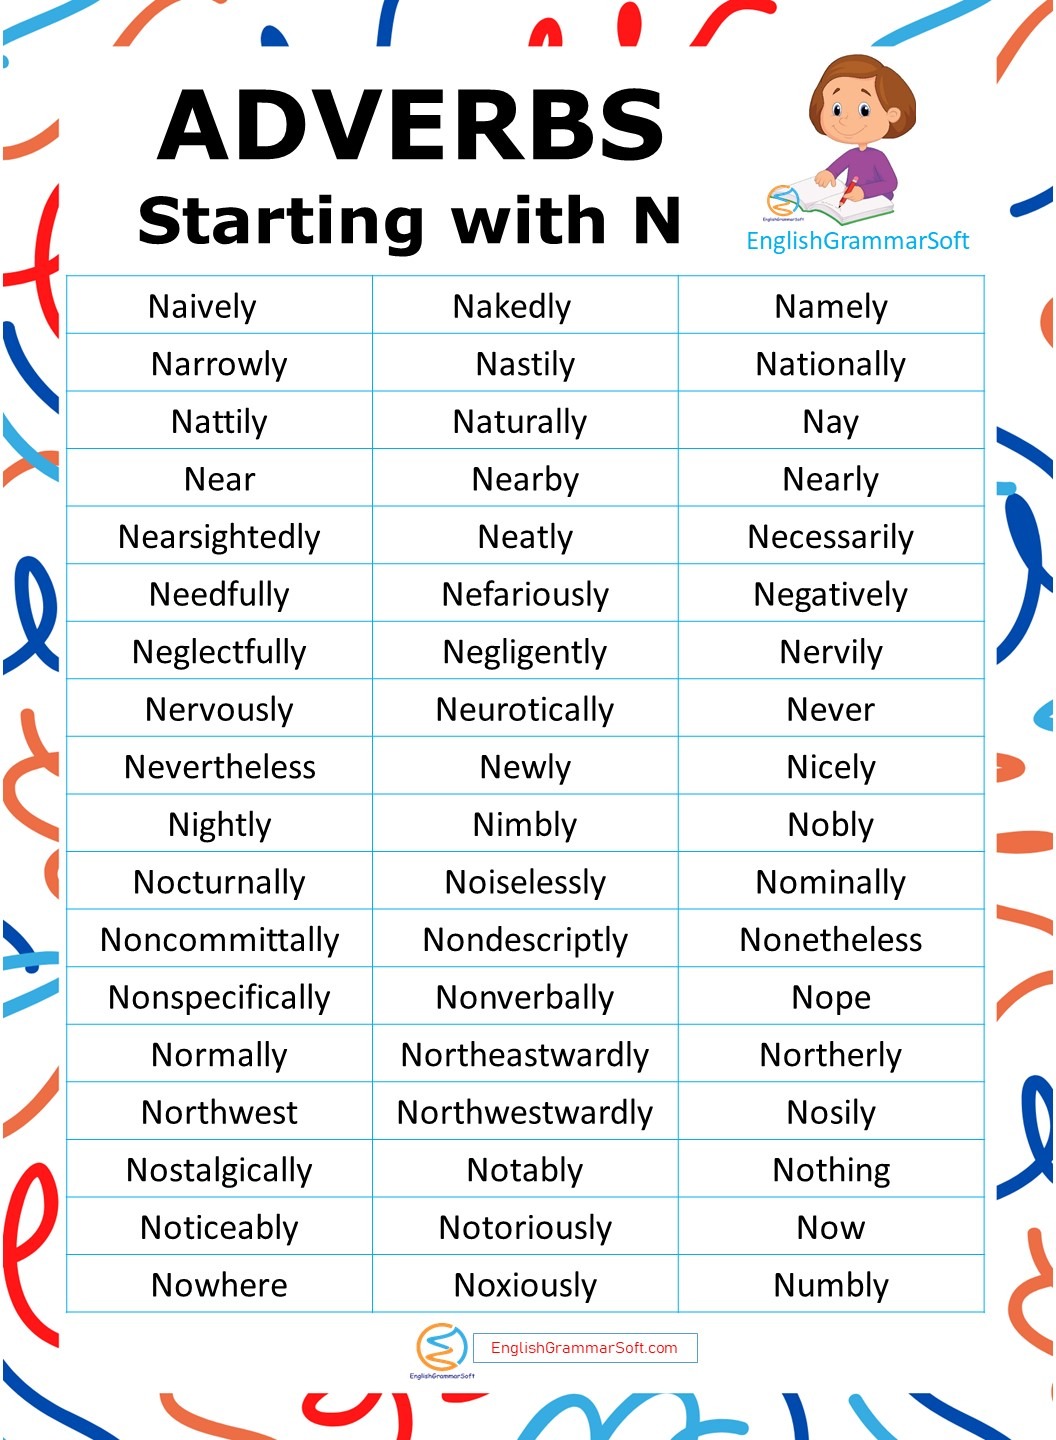 adverbs starting with N